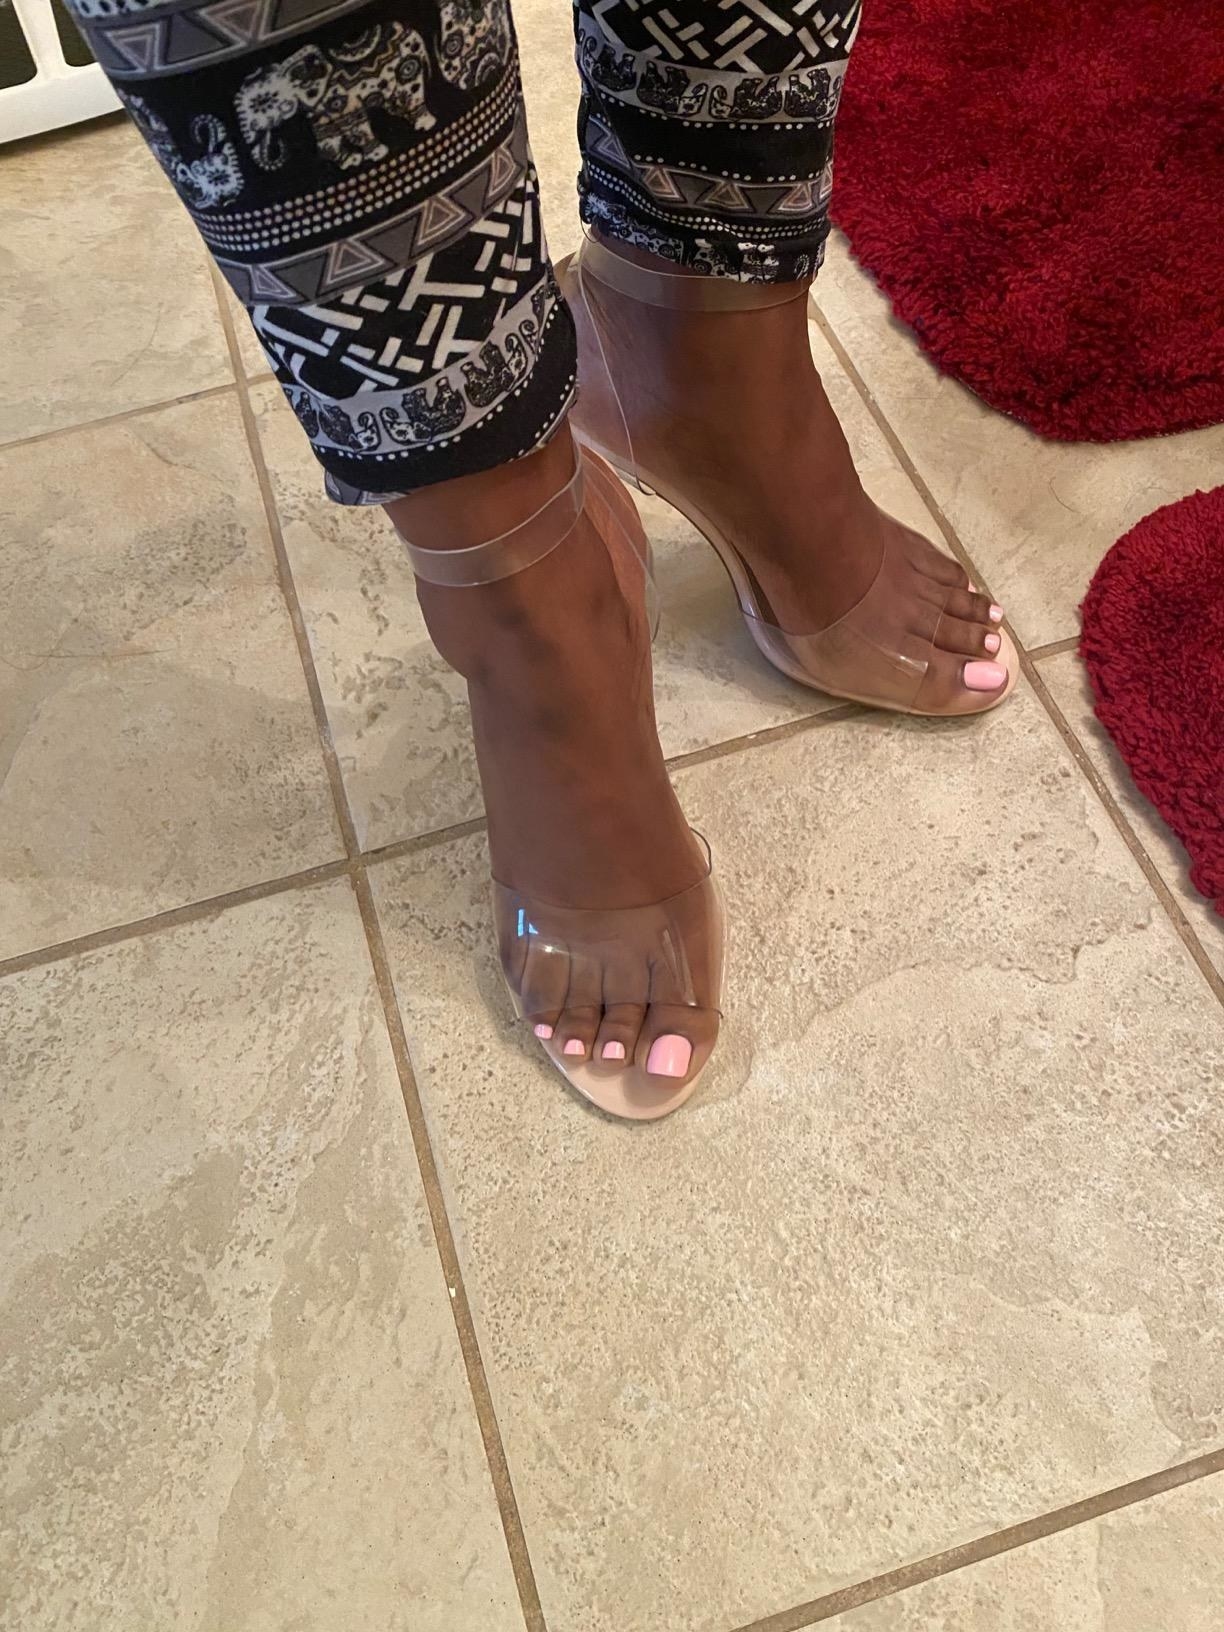 A customer showing off the clear strappy sandal